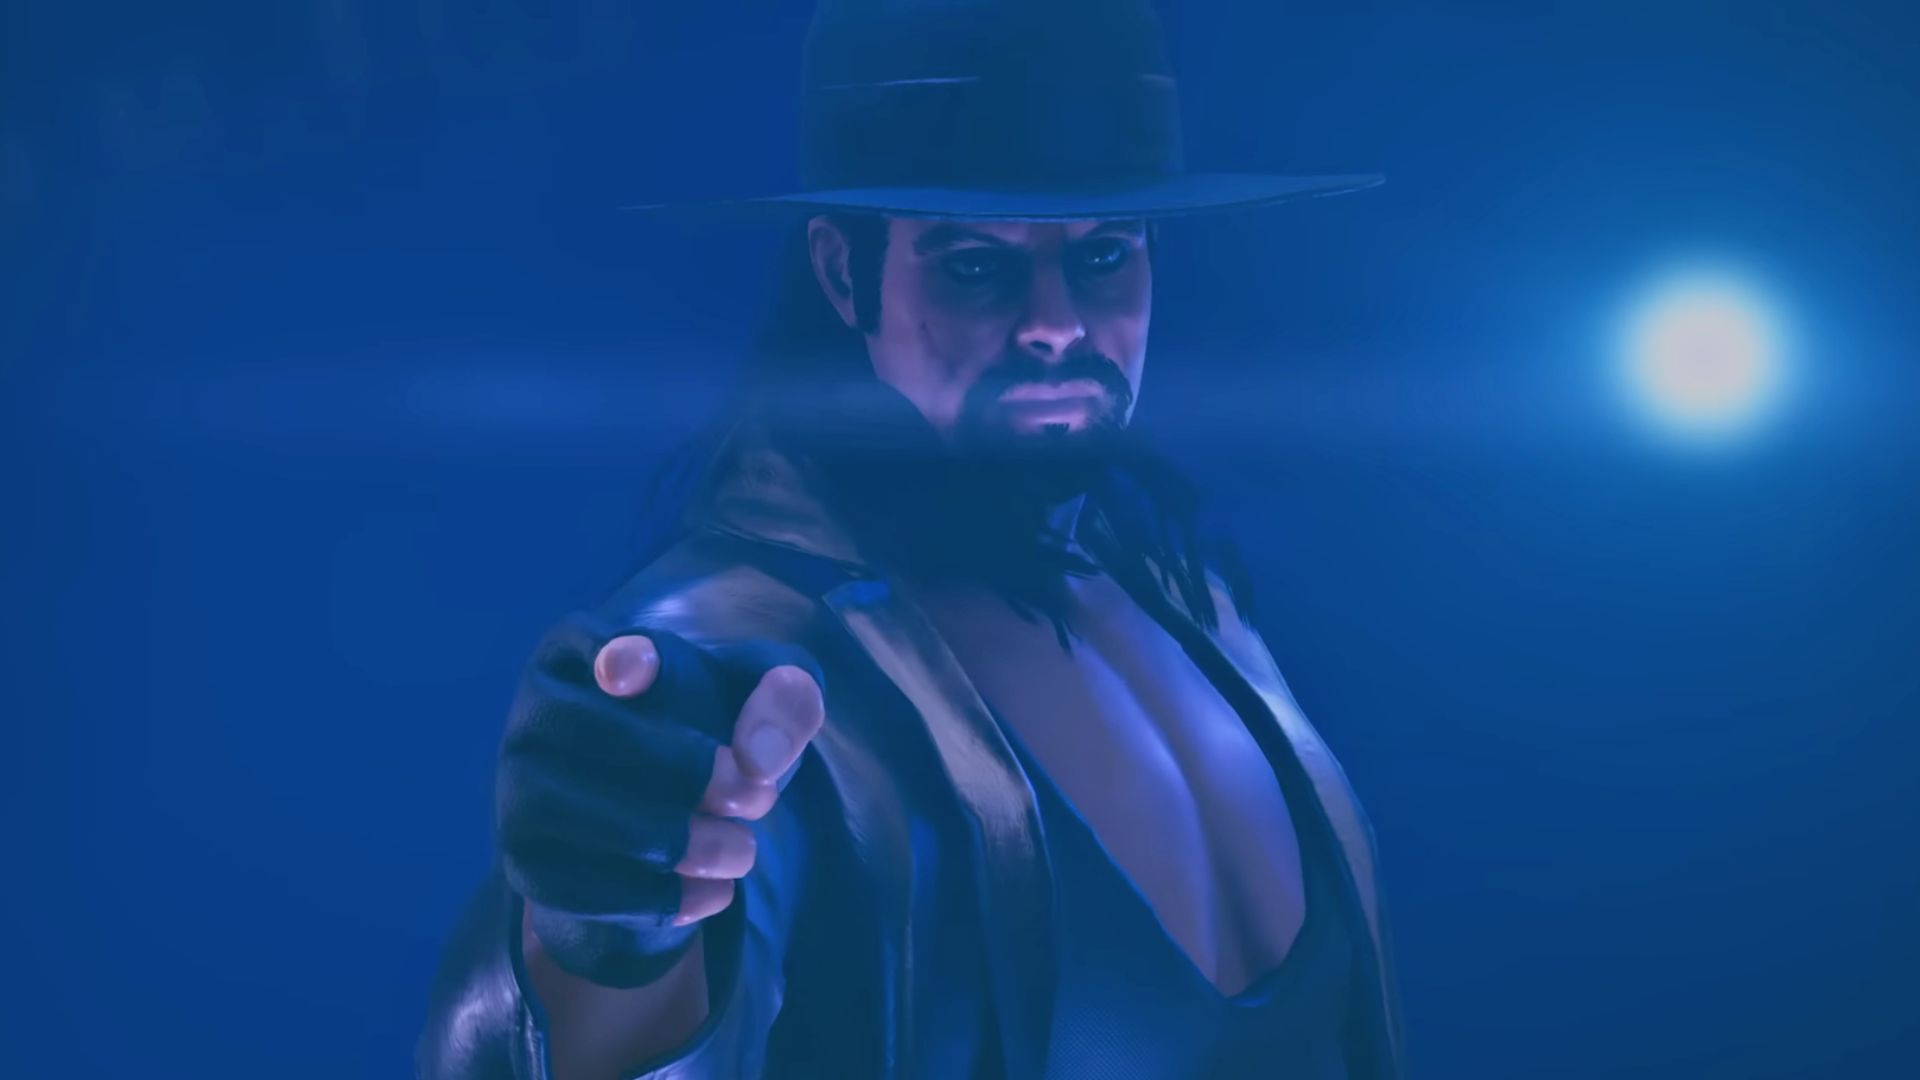 WWE's The Undertaker is in Rainbow Six Siege and looks absurd